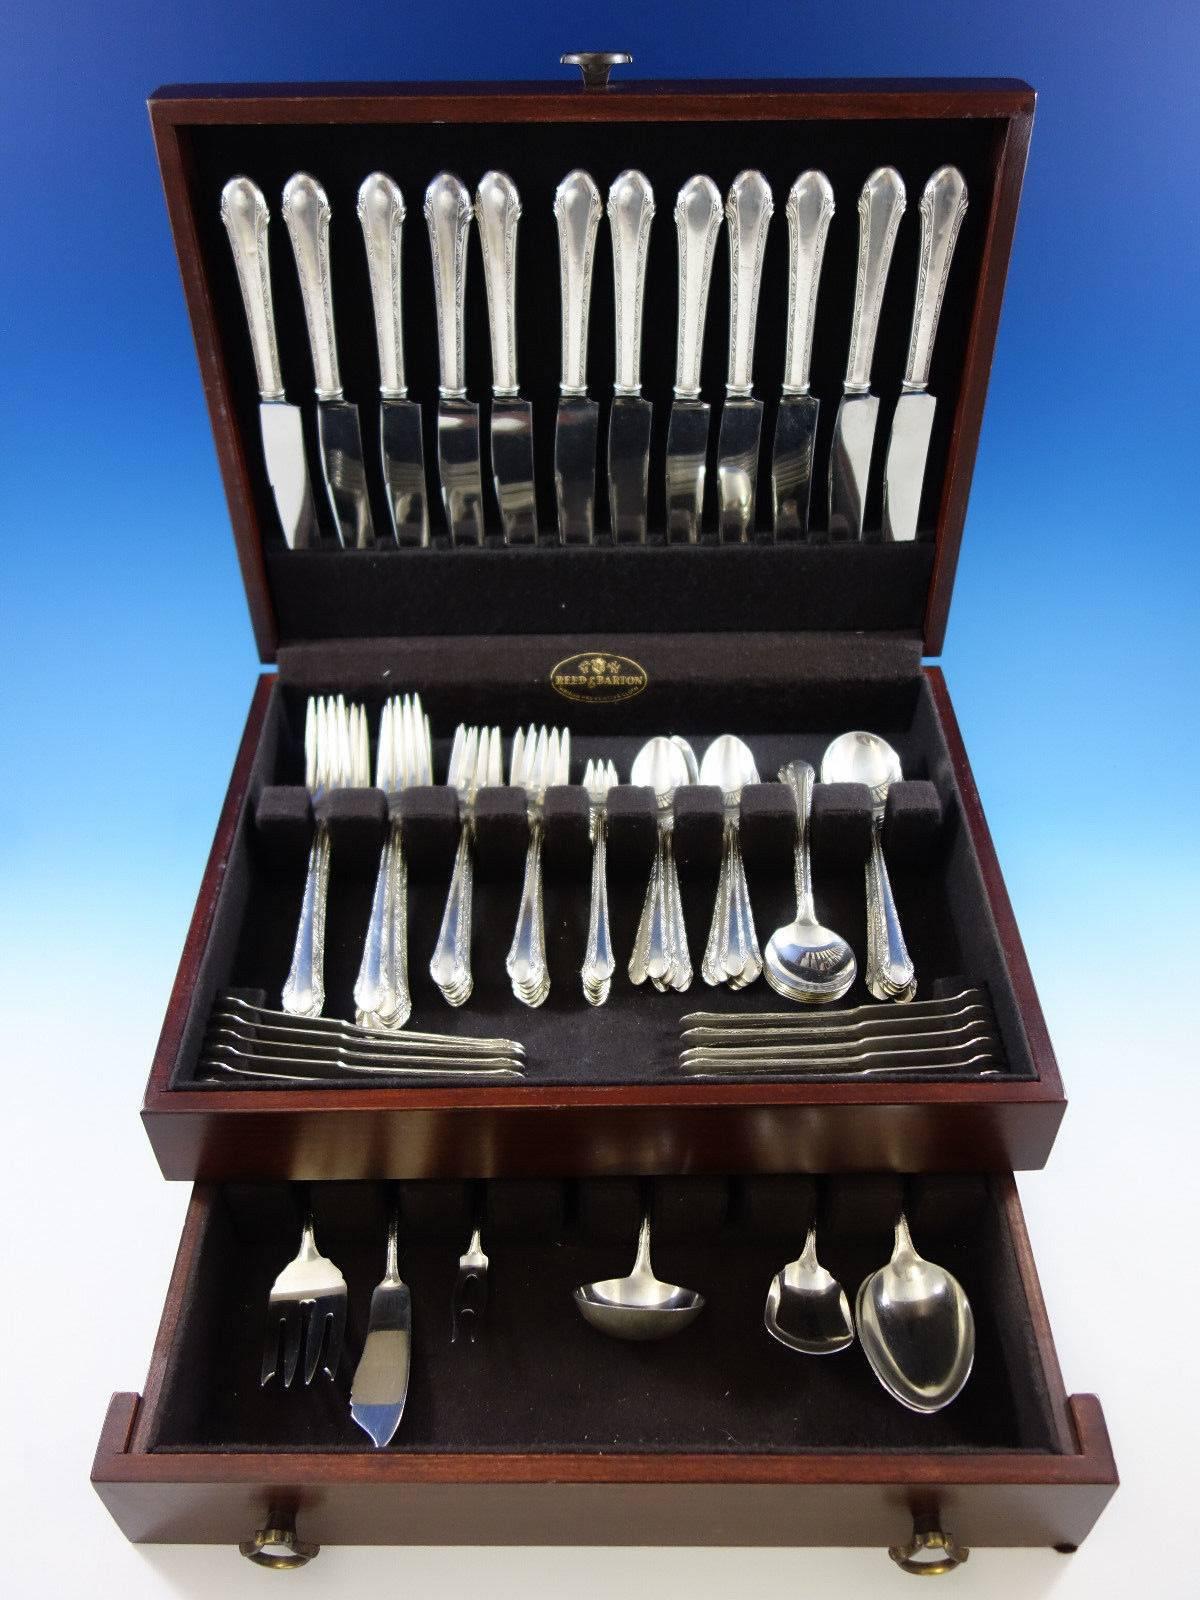 Dinner size chased Romanesque by Alvin sterling silver Flatware set, 91 pieces. This set includes: 

12 dinner size knives, 9 5/8